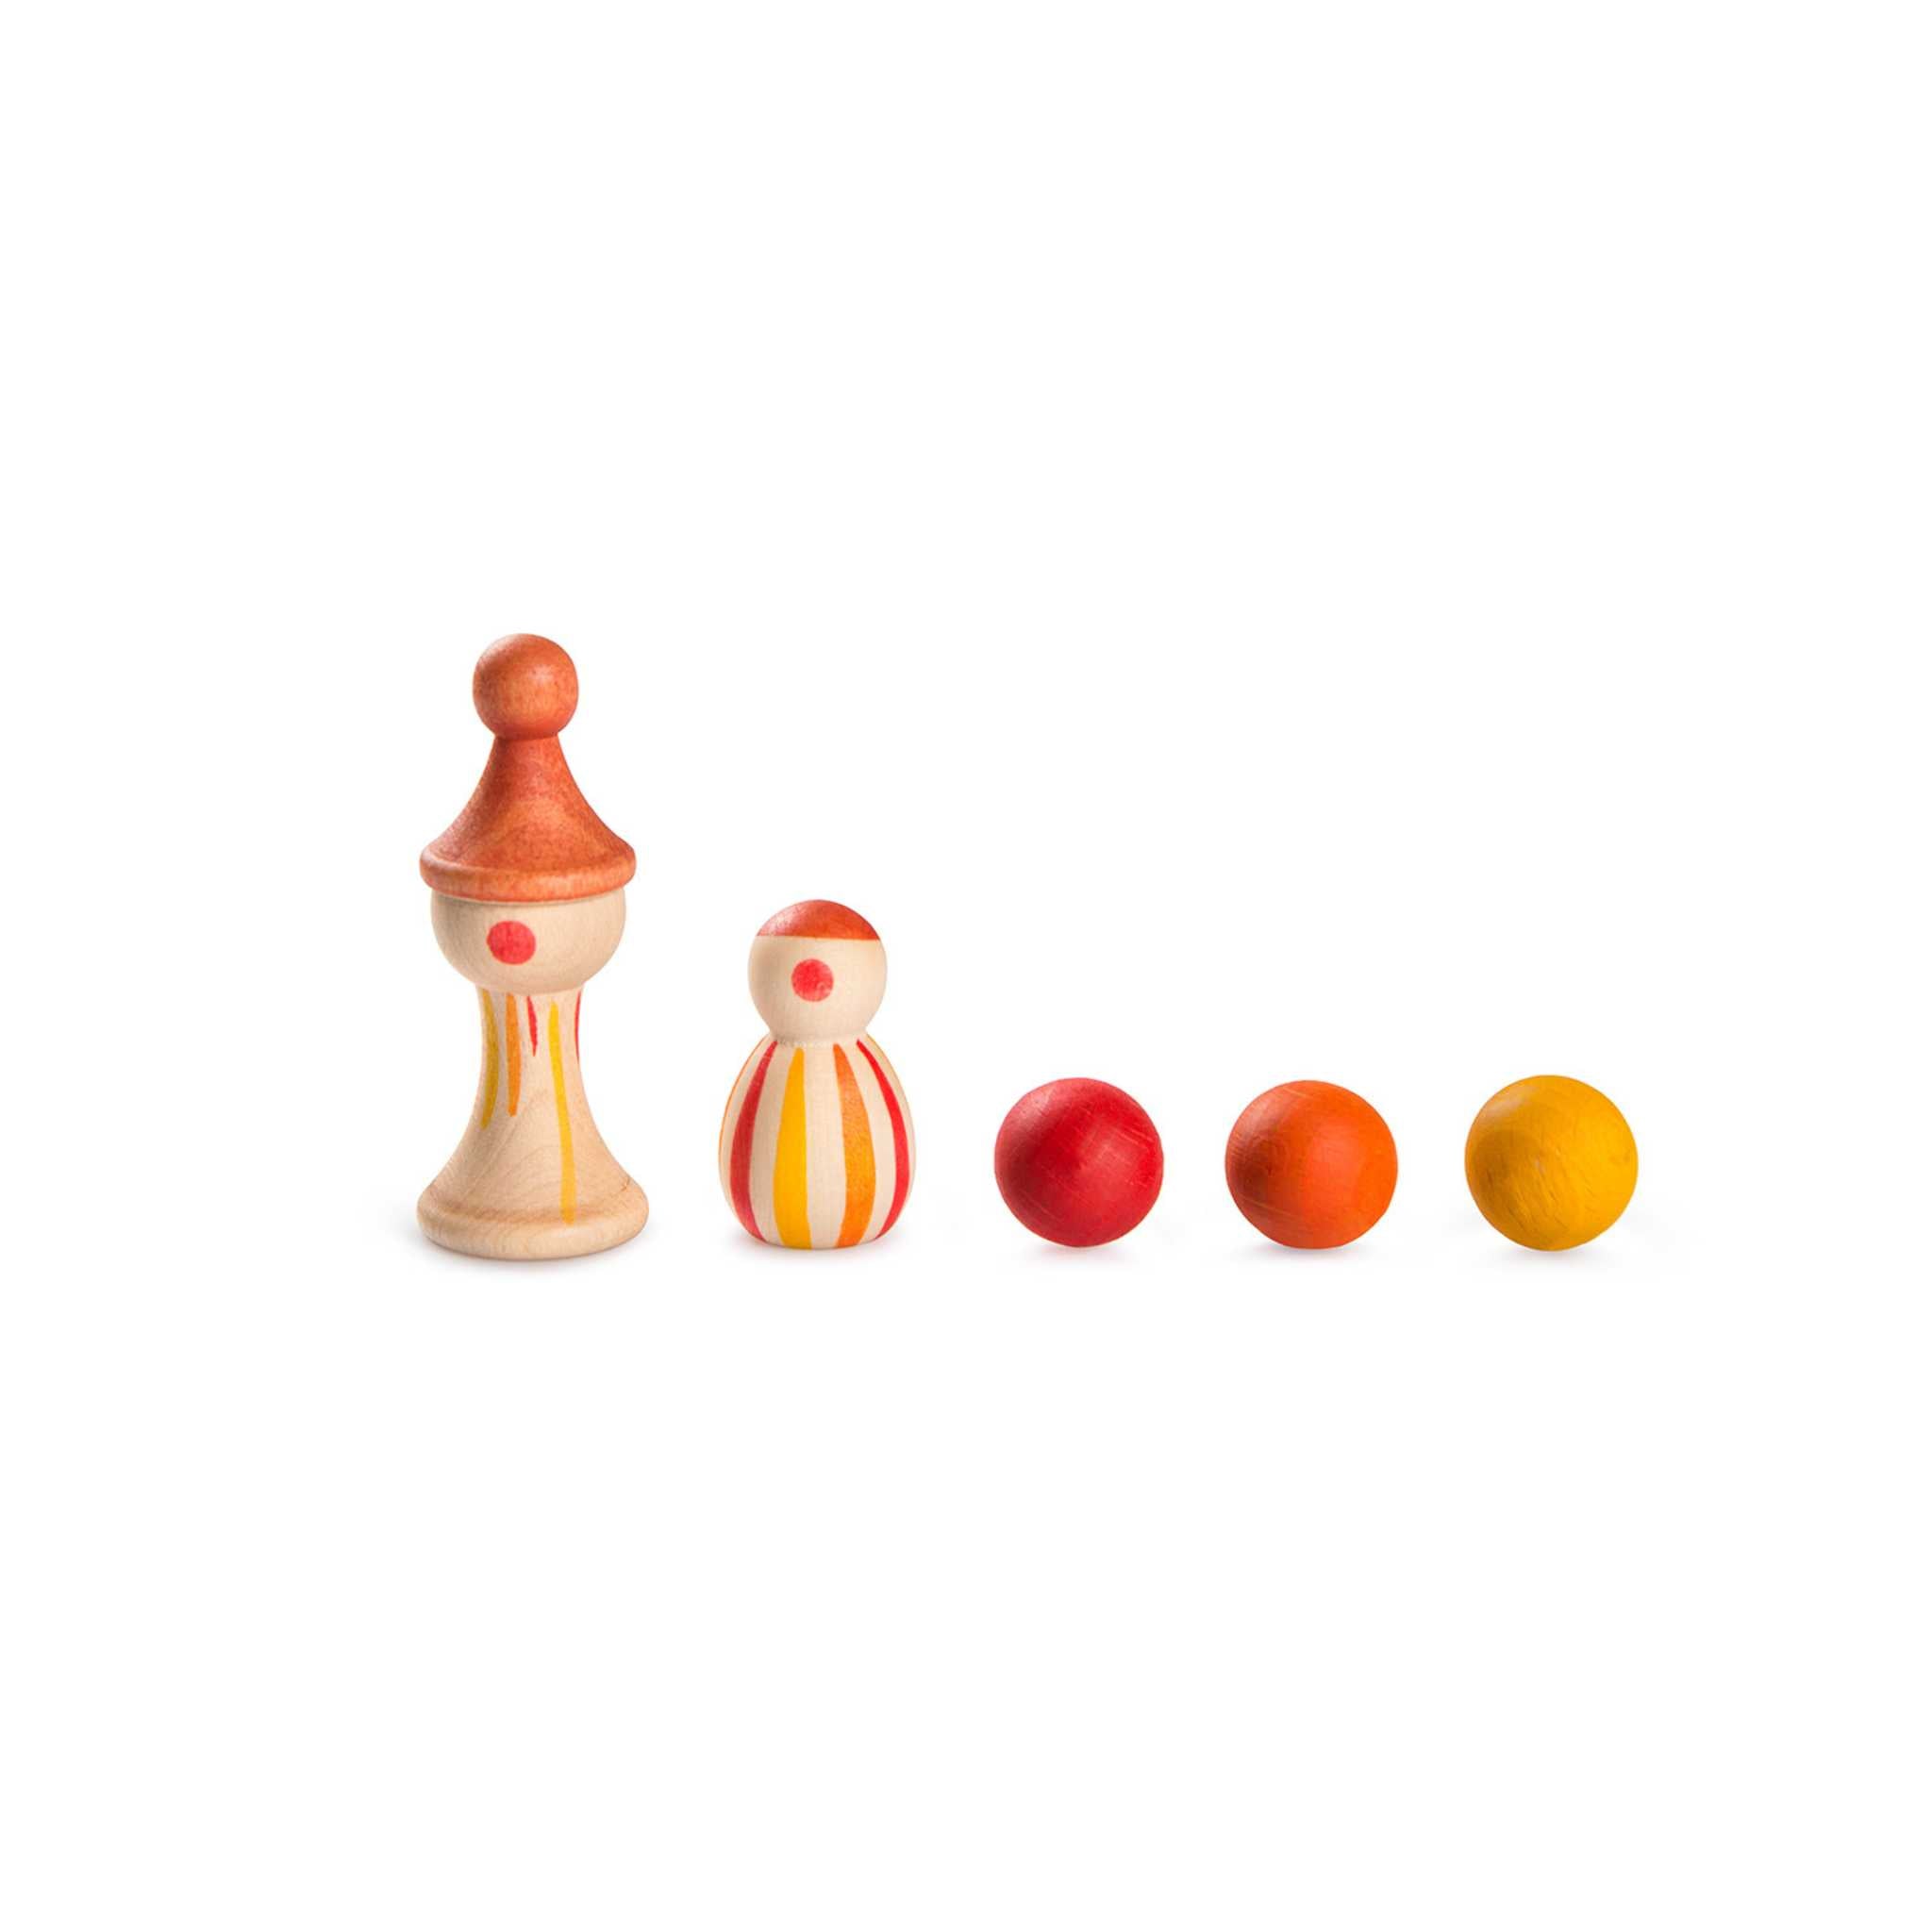 5 Wooden Toys From Grapat Lucky Luck Collection On White Background